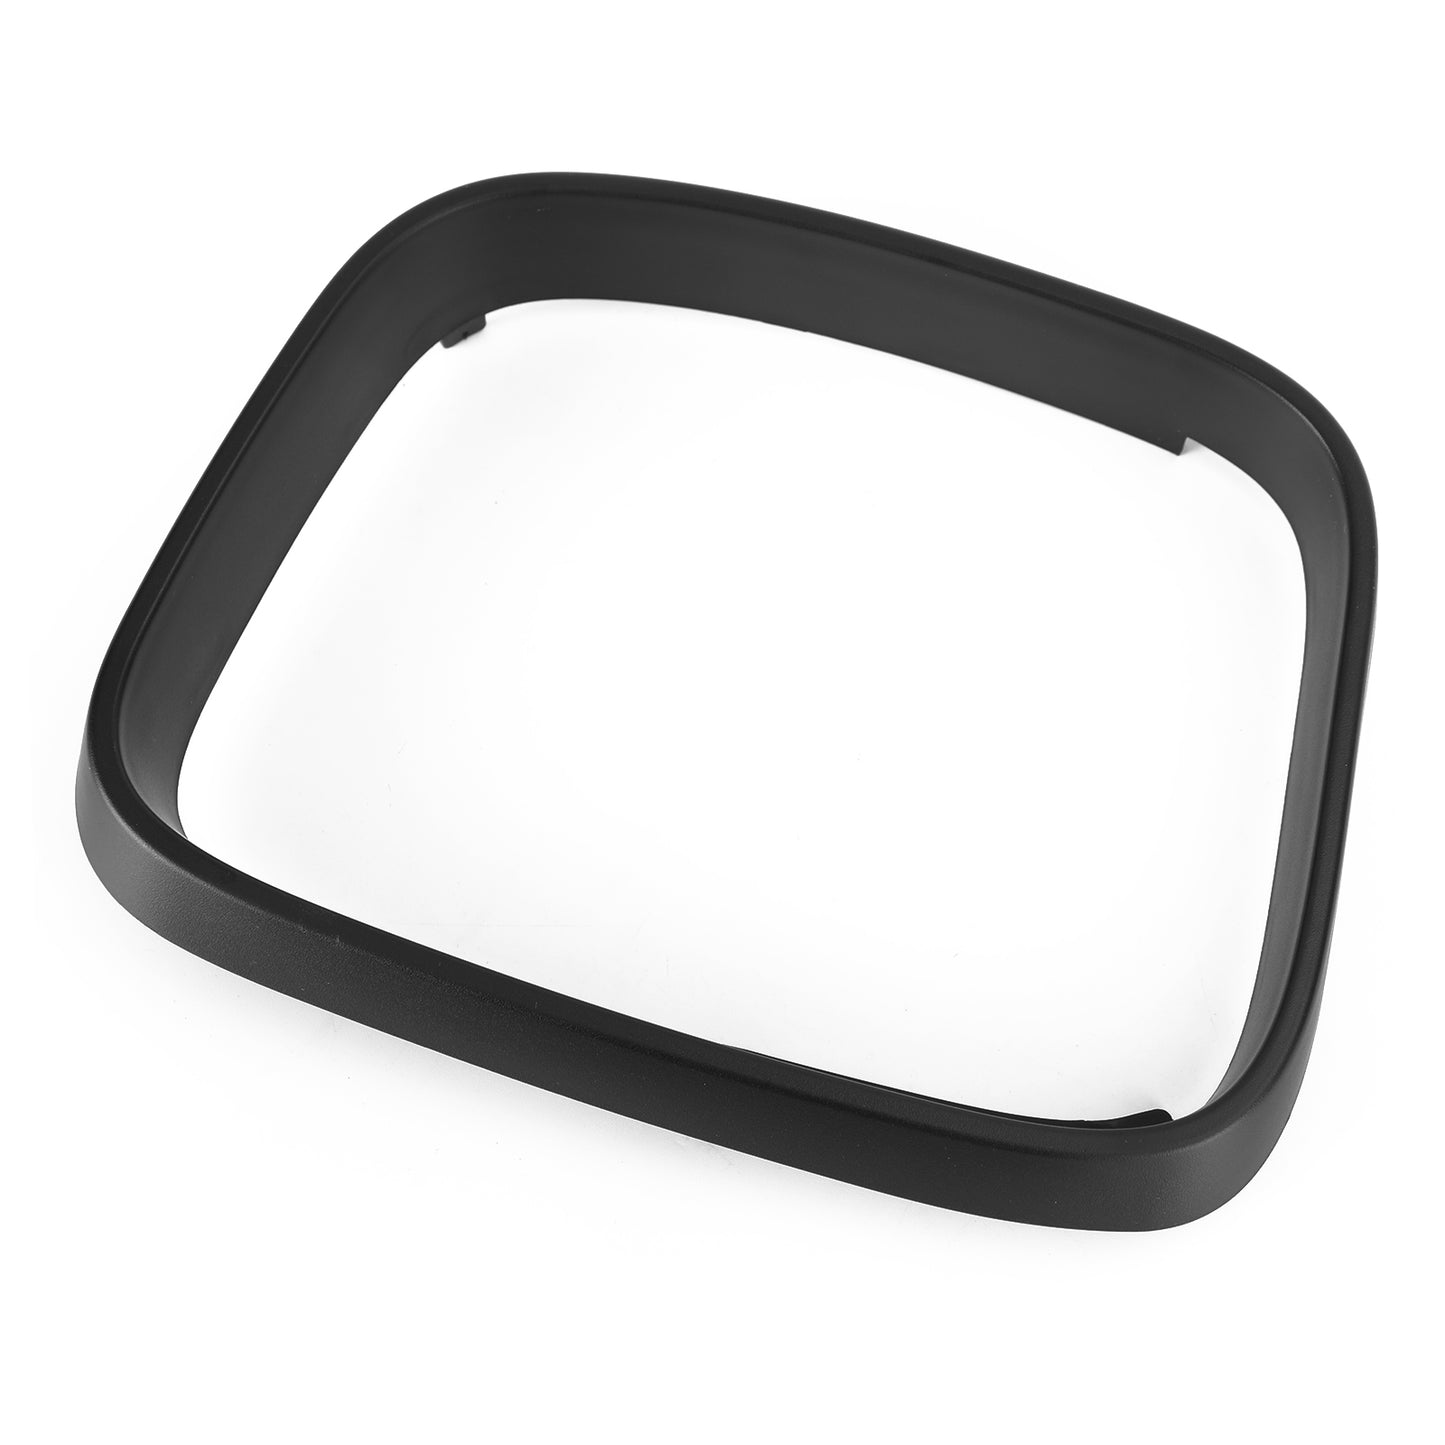 Caddy Wing Mirror Cover Door Trim Ring Bezel Cap for VW Transporter T5-Right